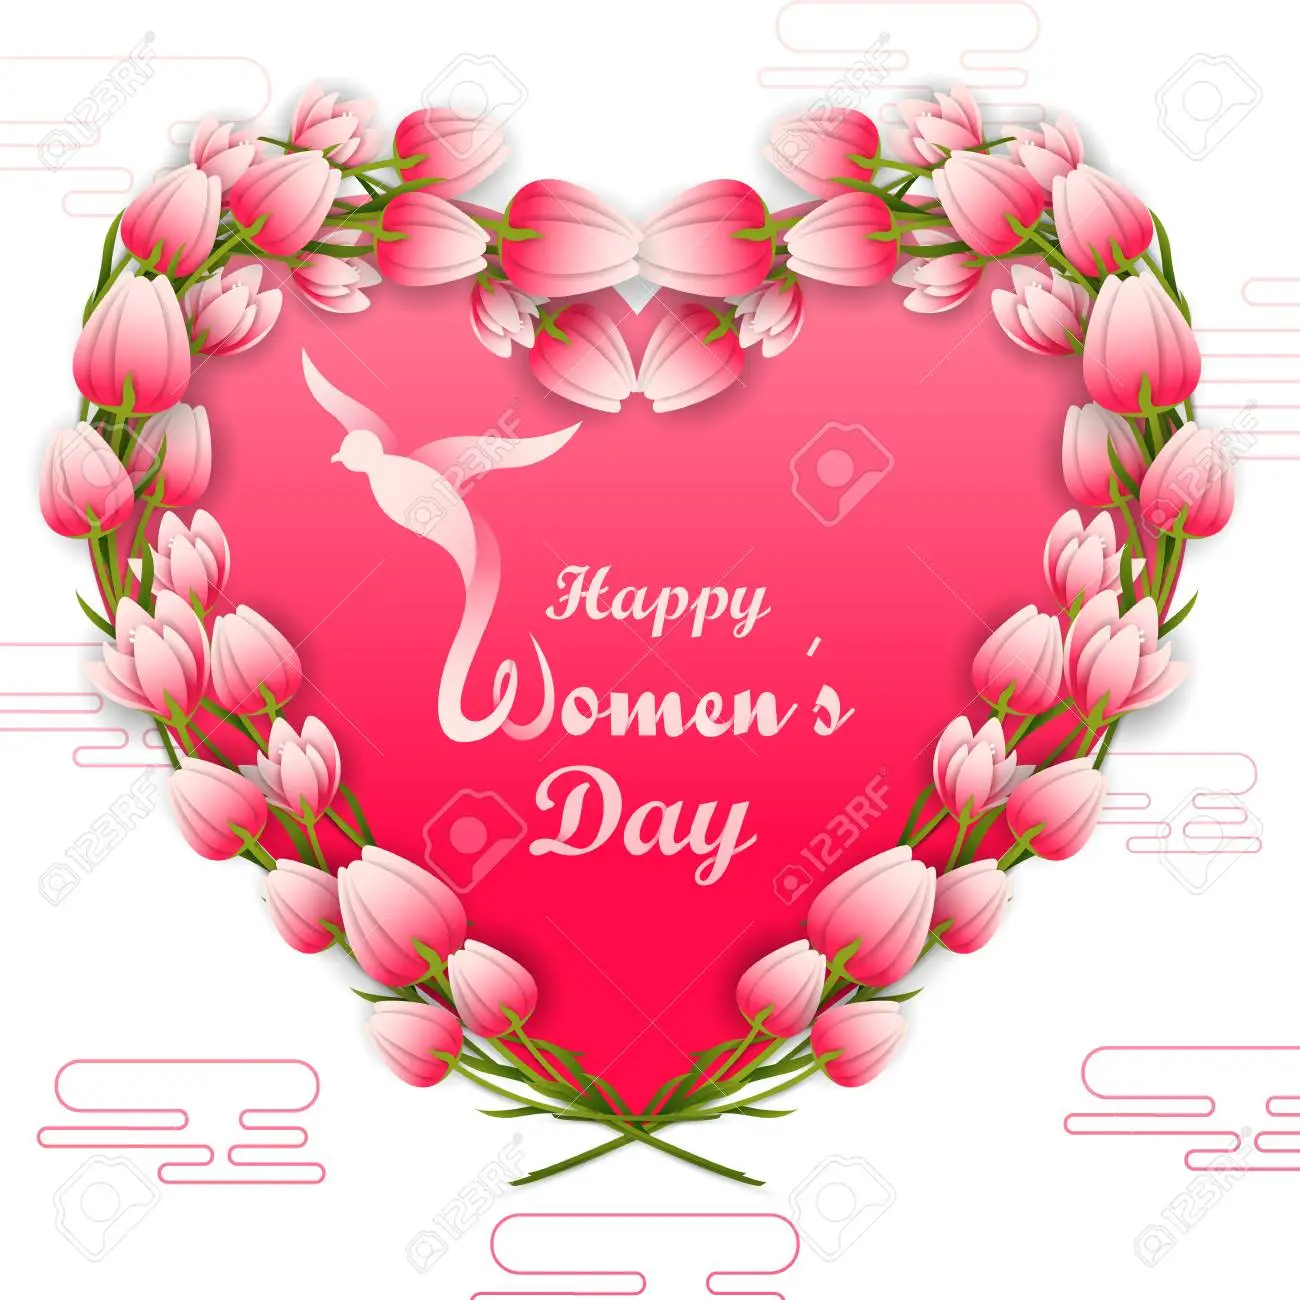 Happy international womens day greetings wallpaper background royalty free svg cliparts vectors and stock illustration image